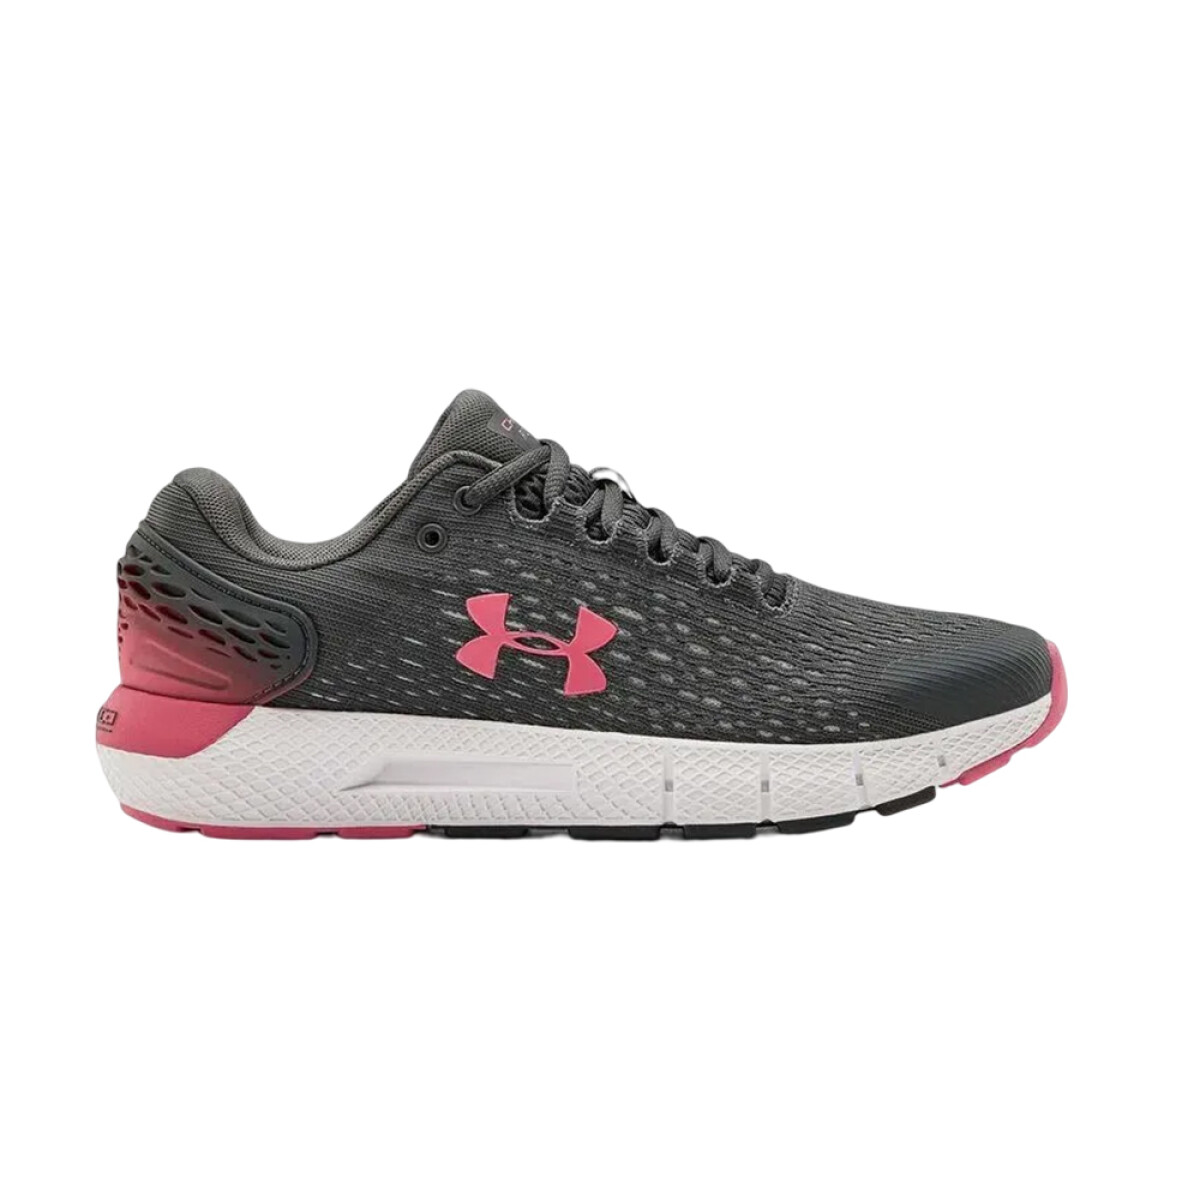 UNDER ARMOUR CHARGED ROGUE 2 - Grey/Pink 